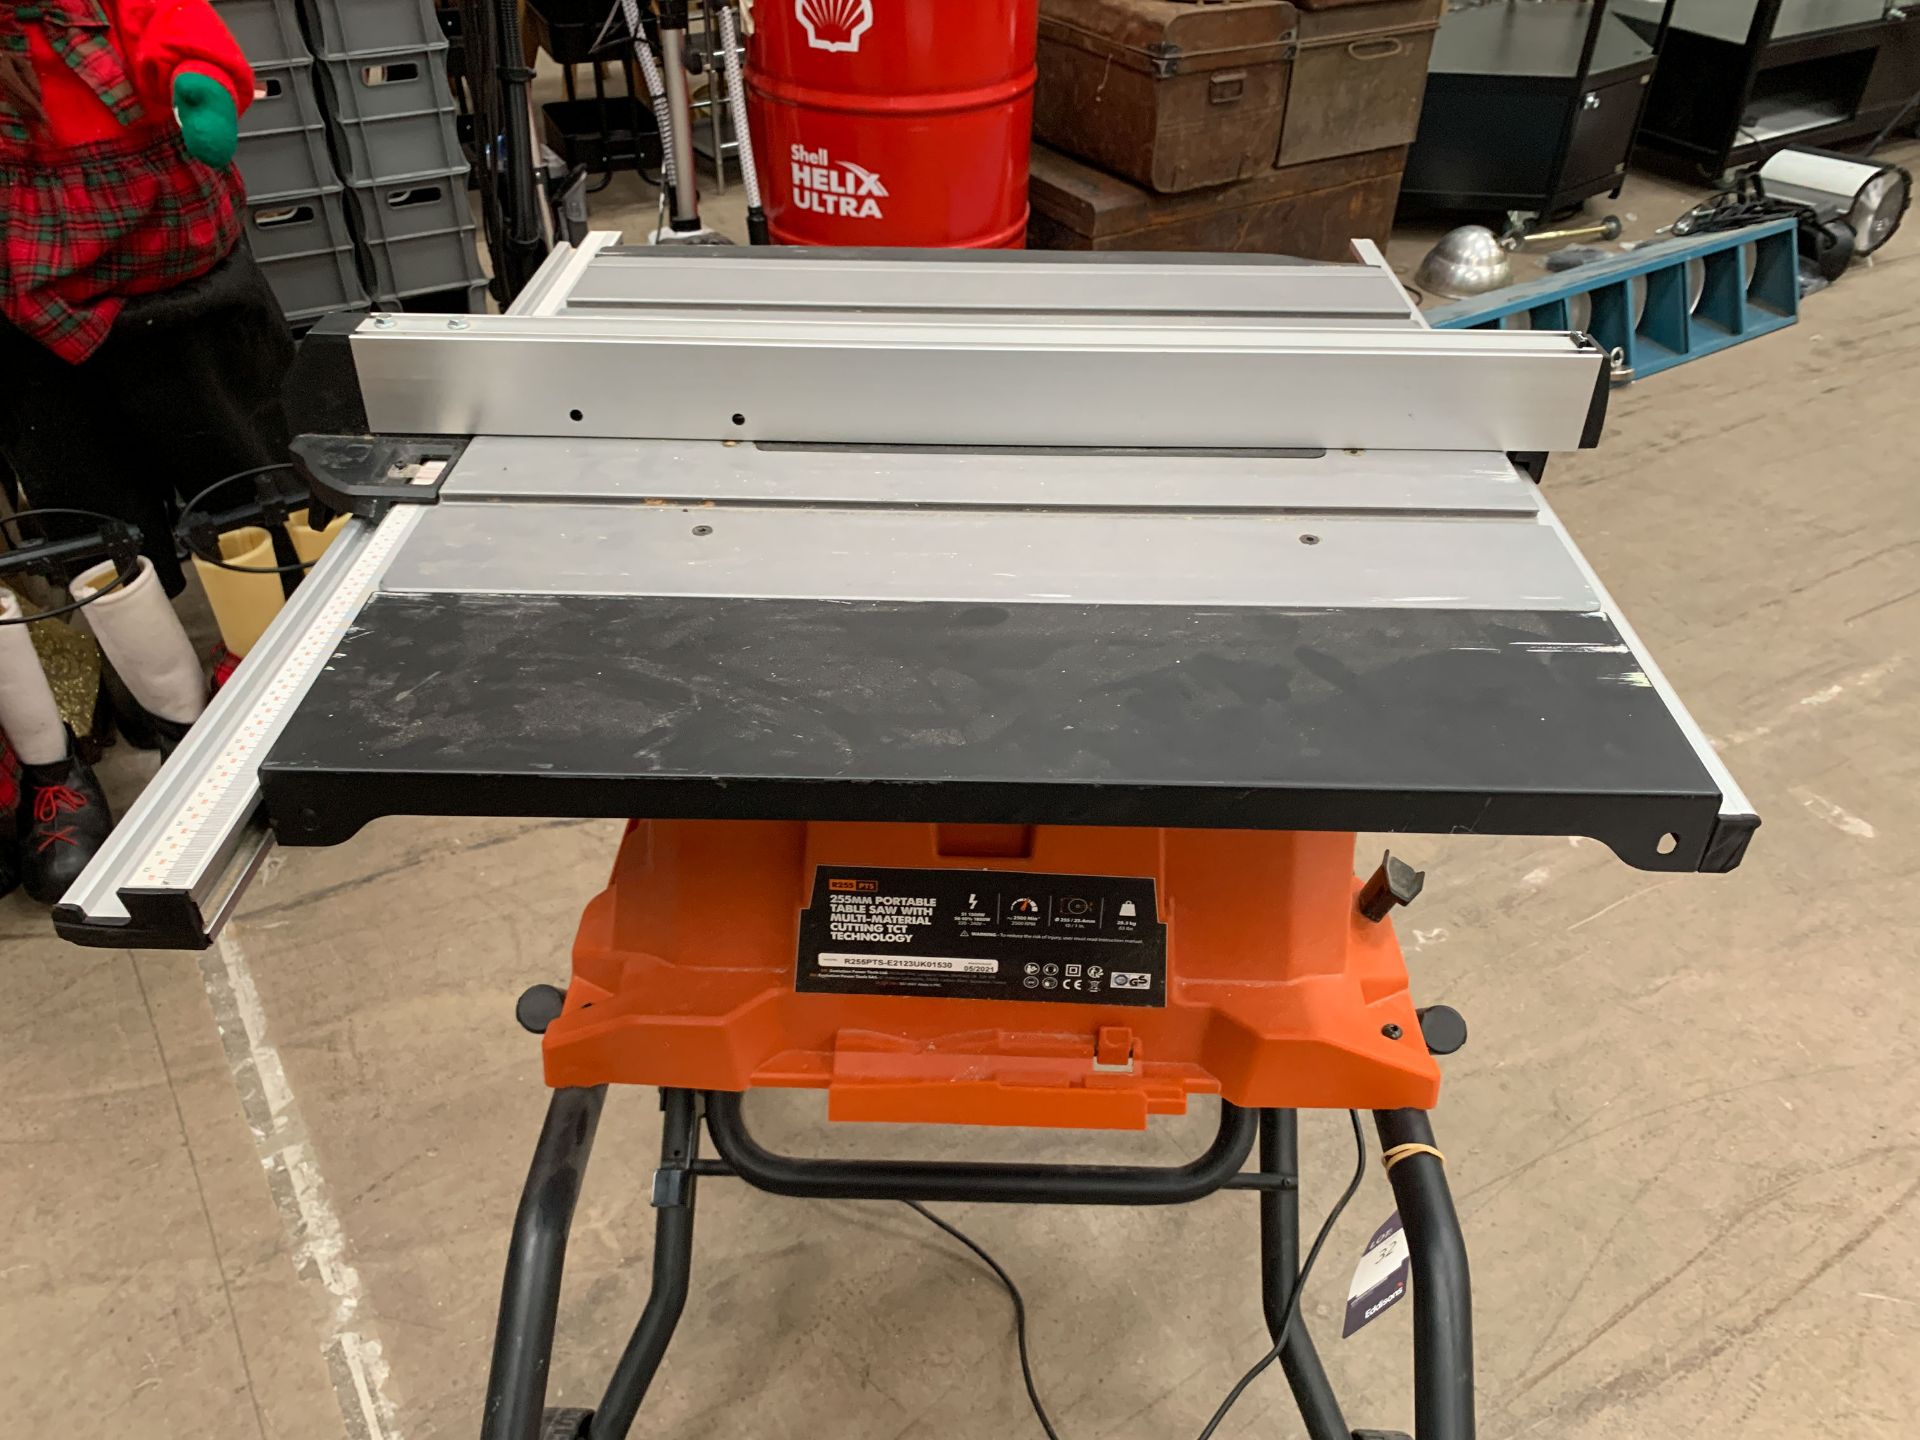 Evolution Power Tools R255PTS 25mm Portable Table Saw - Image 4 of 4